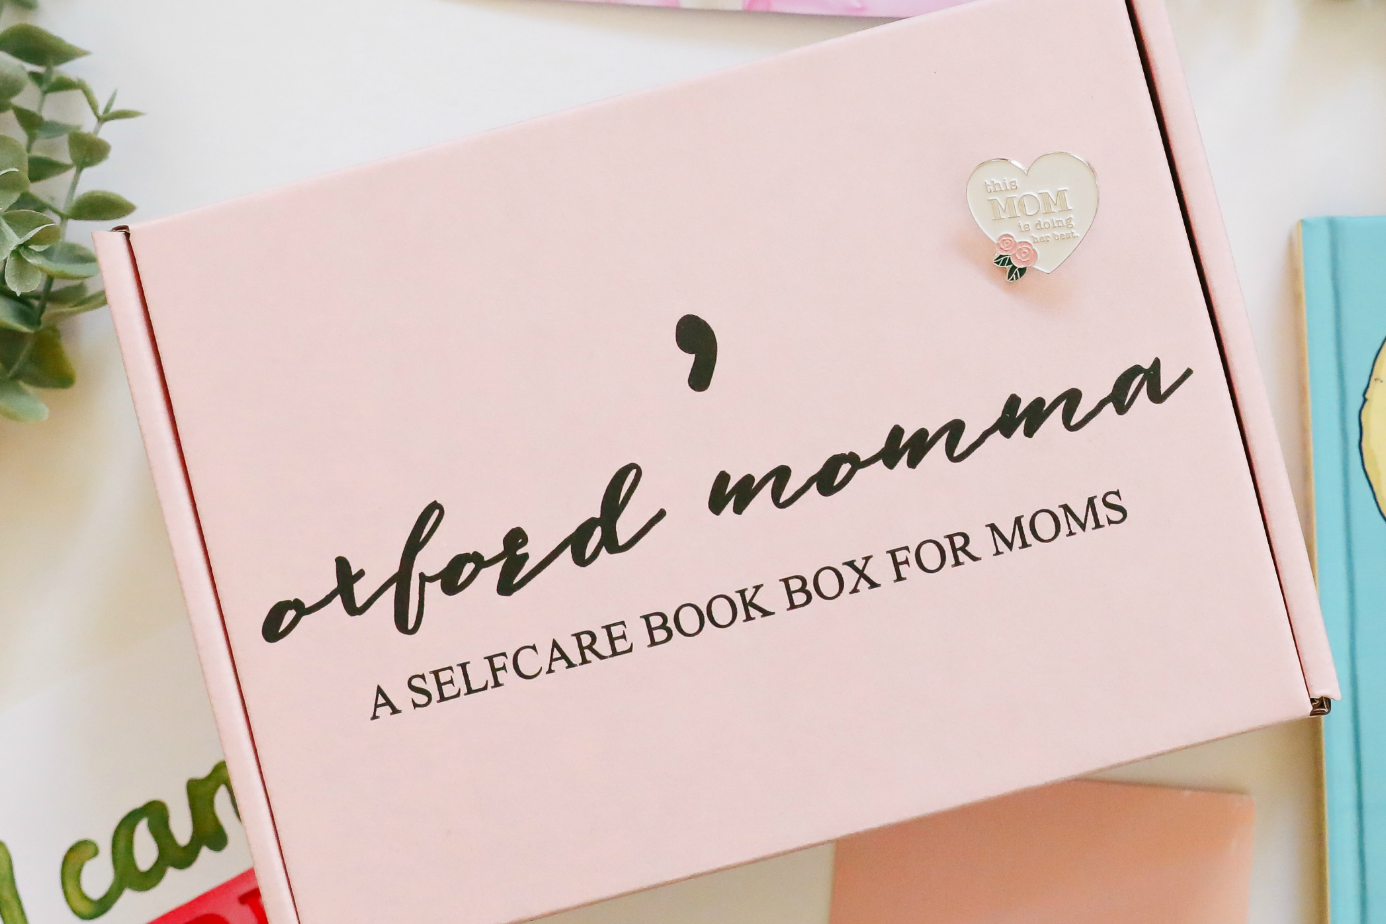 Year Subscription to Oxford Momma Self-care Subscription Box for Moms Giveaway